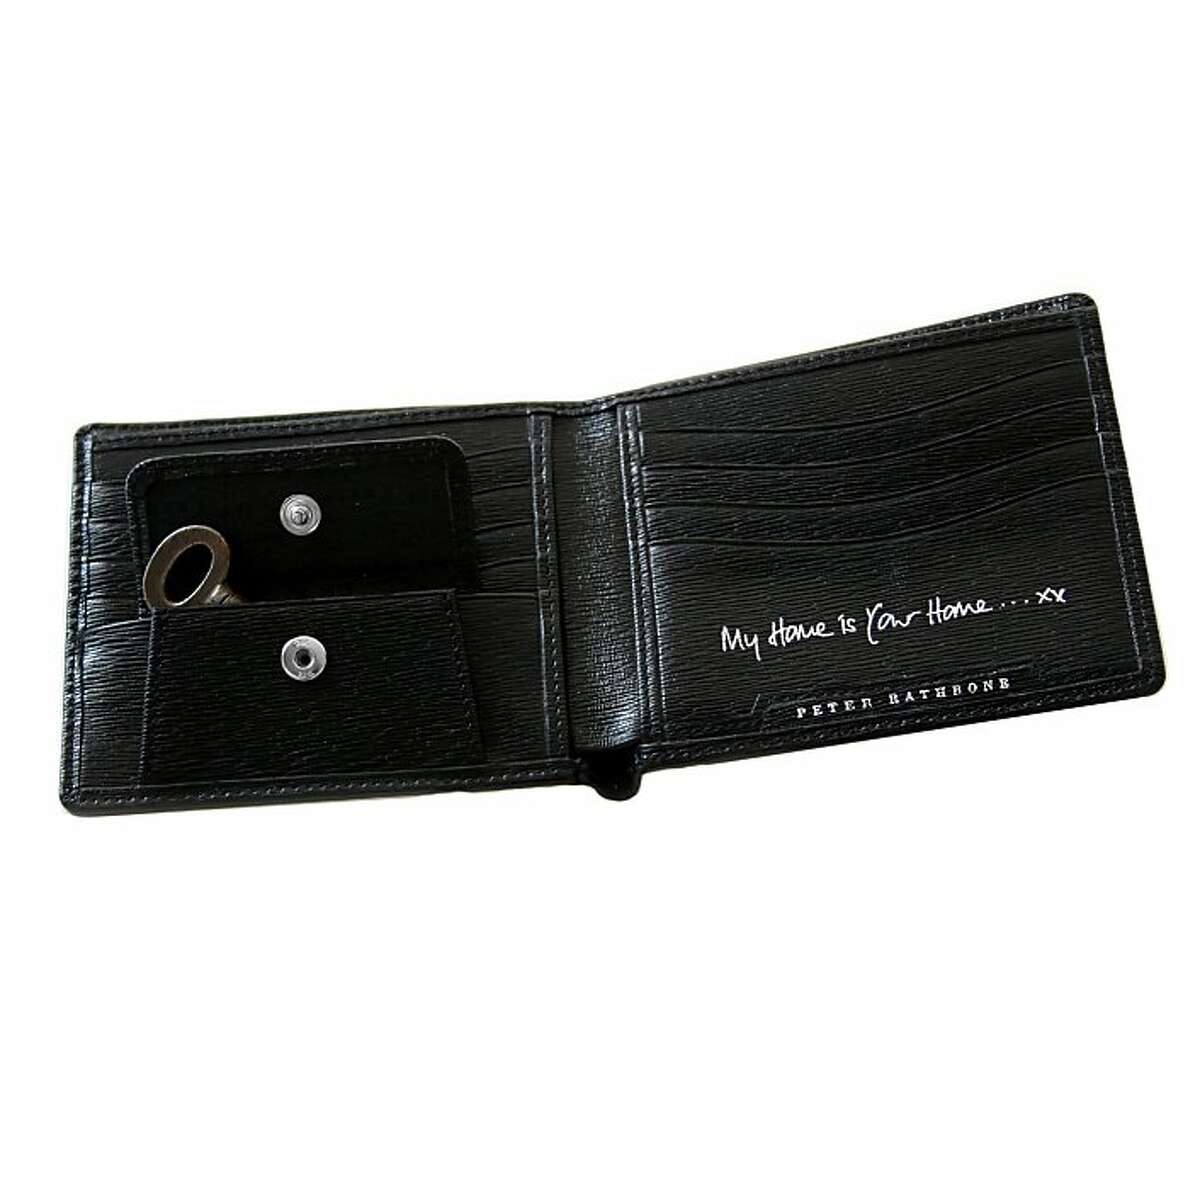 Tell him what you mean, in your own words, in your own writing. Custom-engraved London grain leather wallet, starting at $280, www.anyahindmarch.com. Maybe he’ll open up in return.